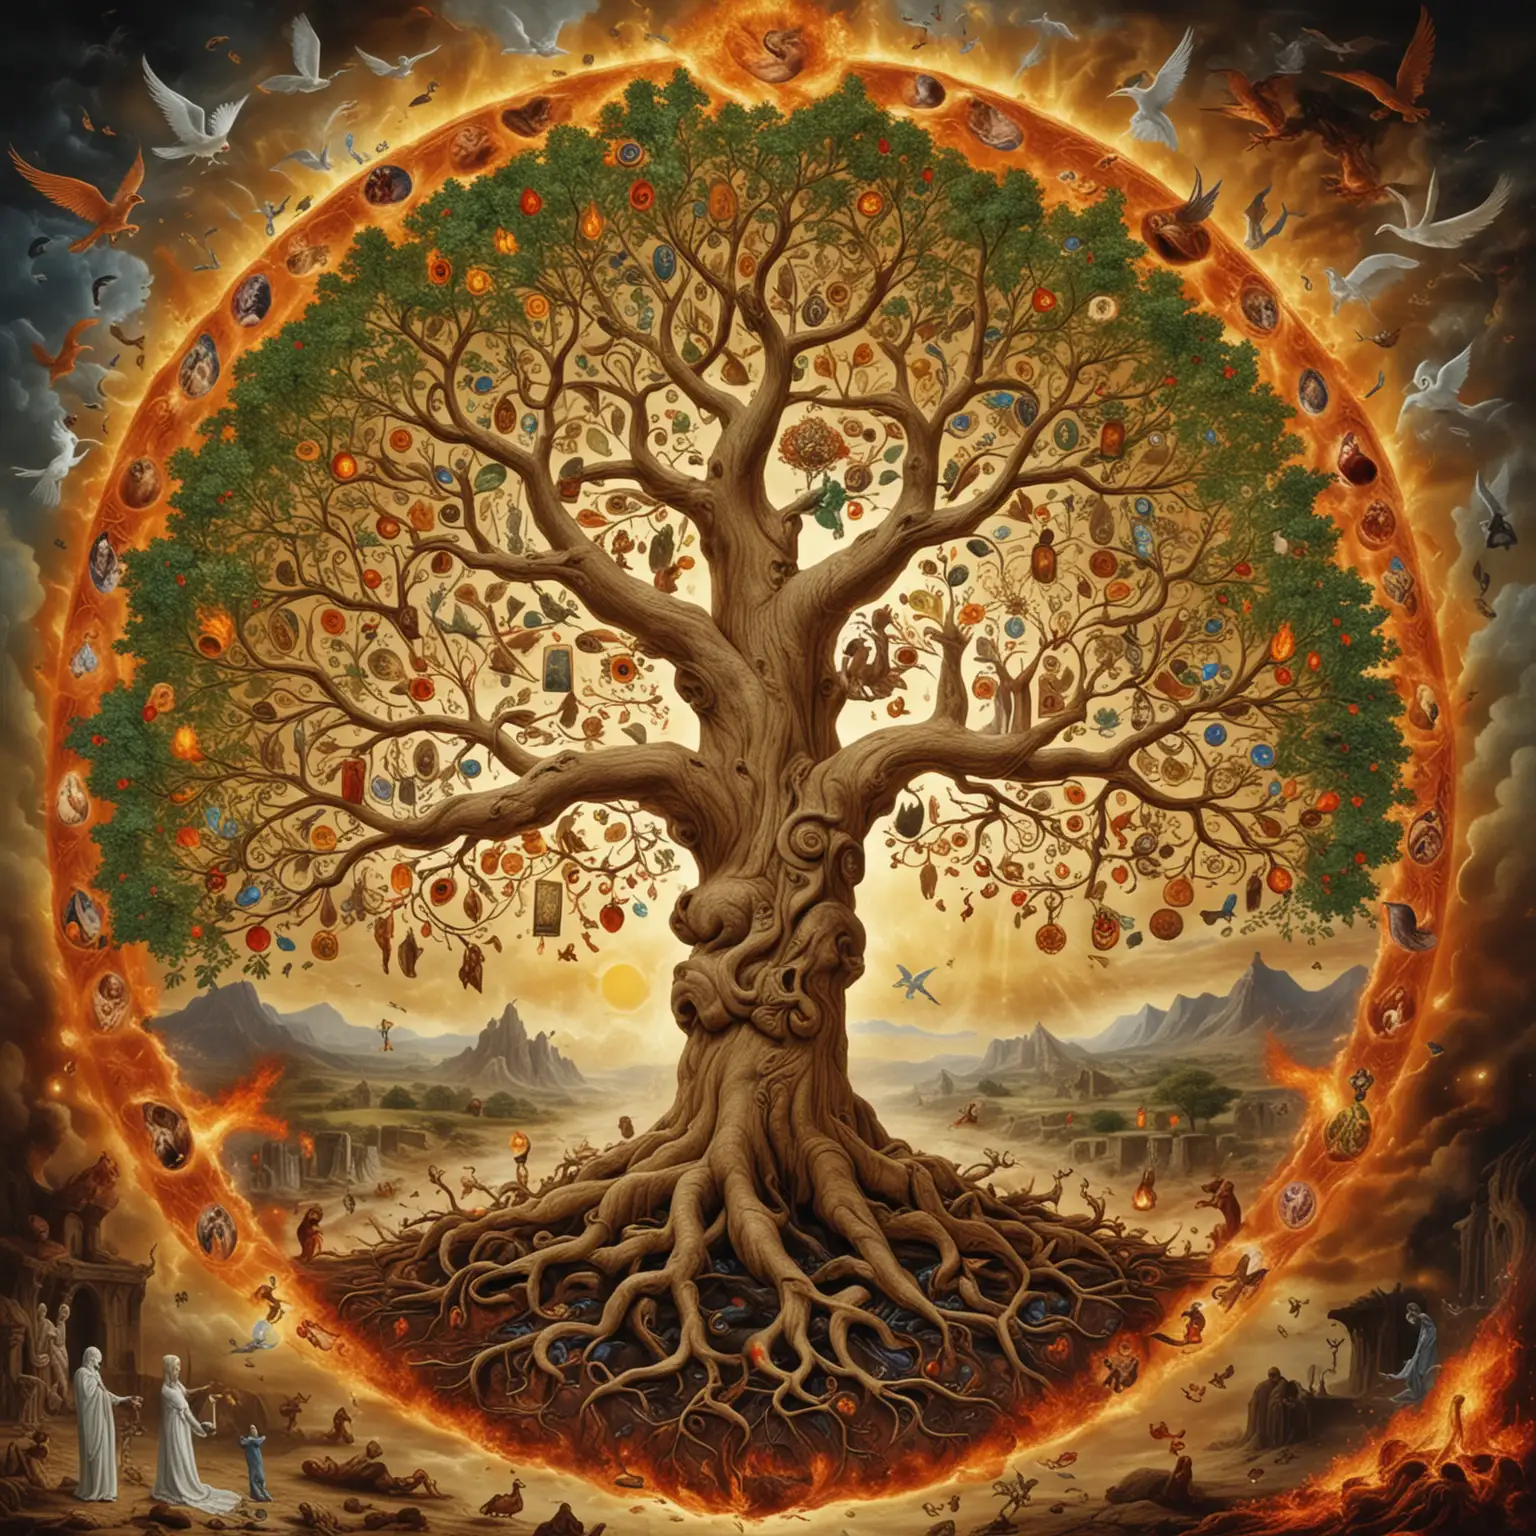 Mystical Tree of Life Bridging Heaven and Hell with Its Flourishing Leaves